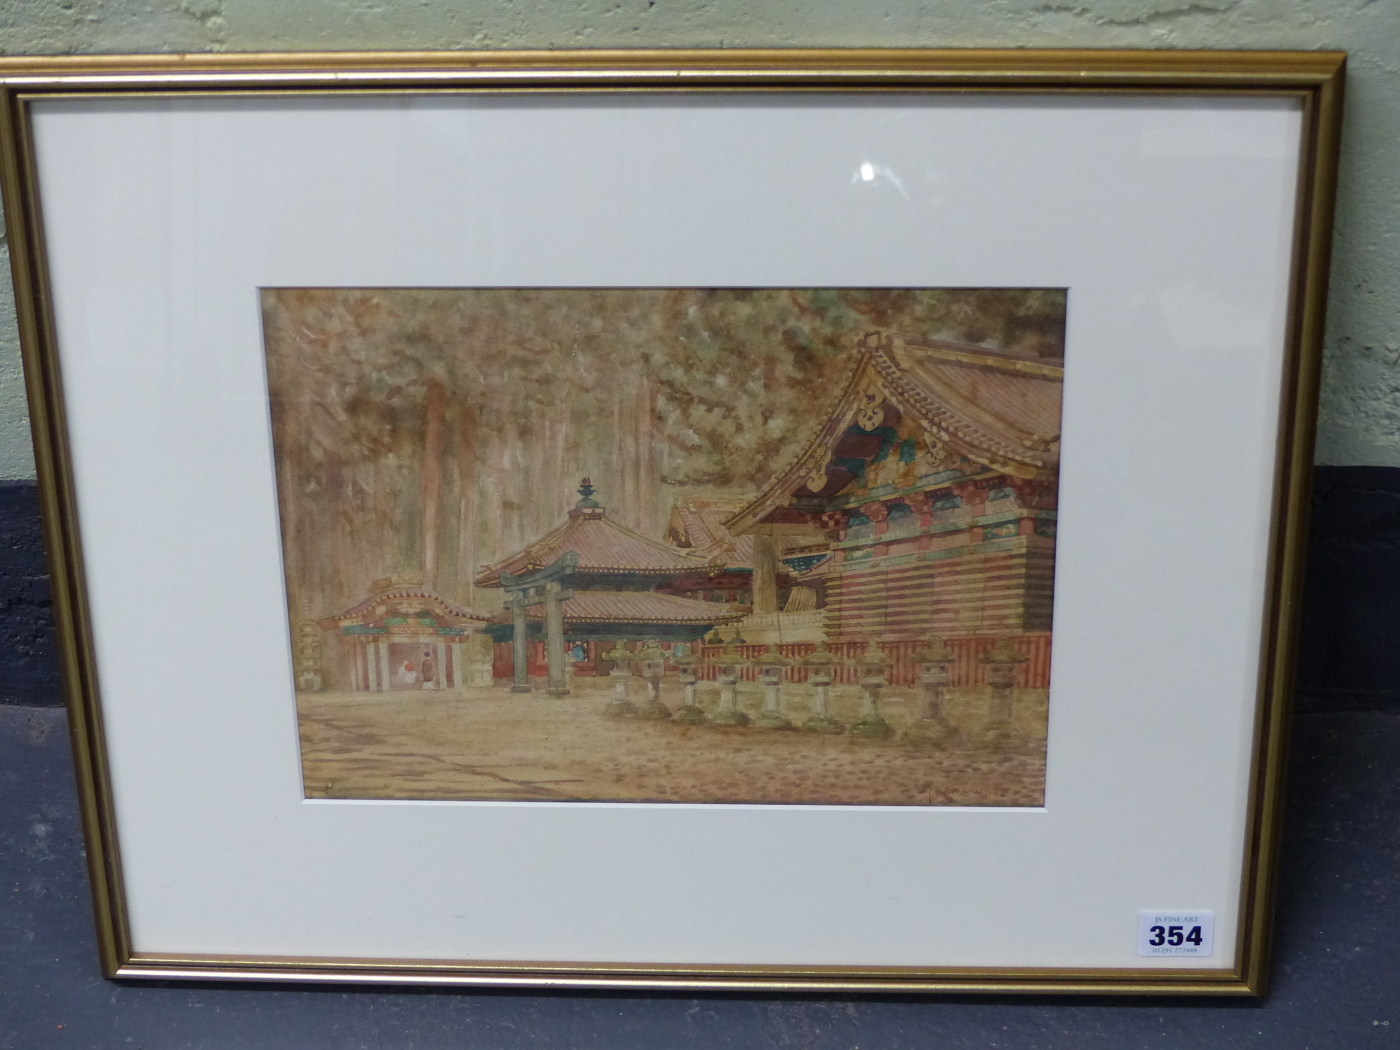 M. KAWAKUBO. EARLY 20th.C. JAPANESE SCHOOL. TEMPLES AMIDST WOODLAND. SIGNED WATERCOLOUR. 23 x - Image 3 of 4